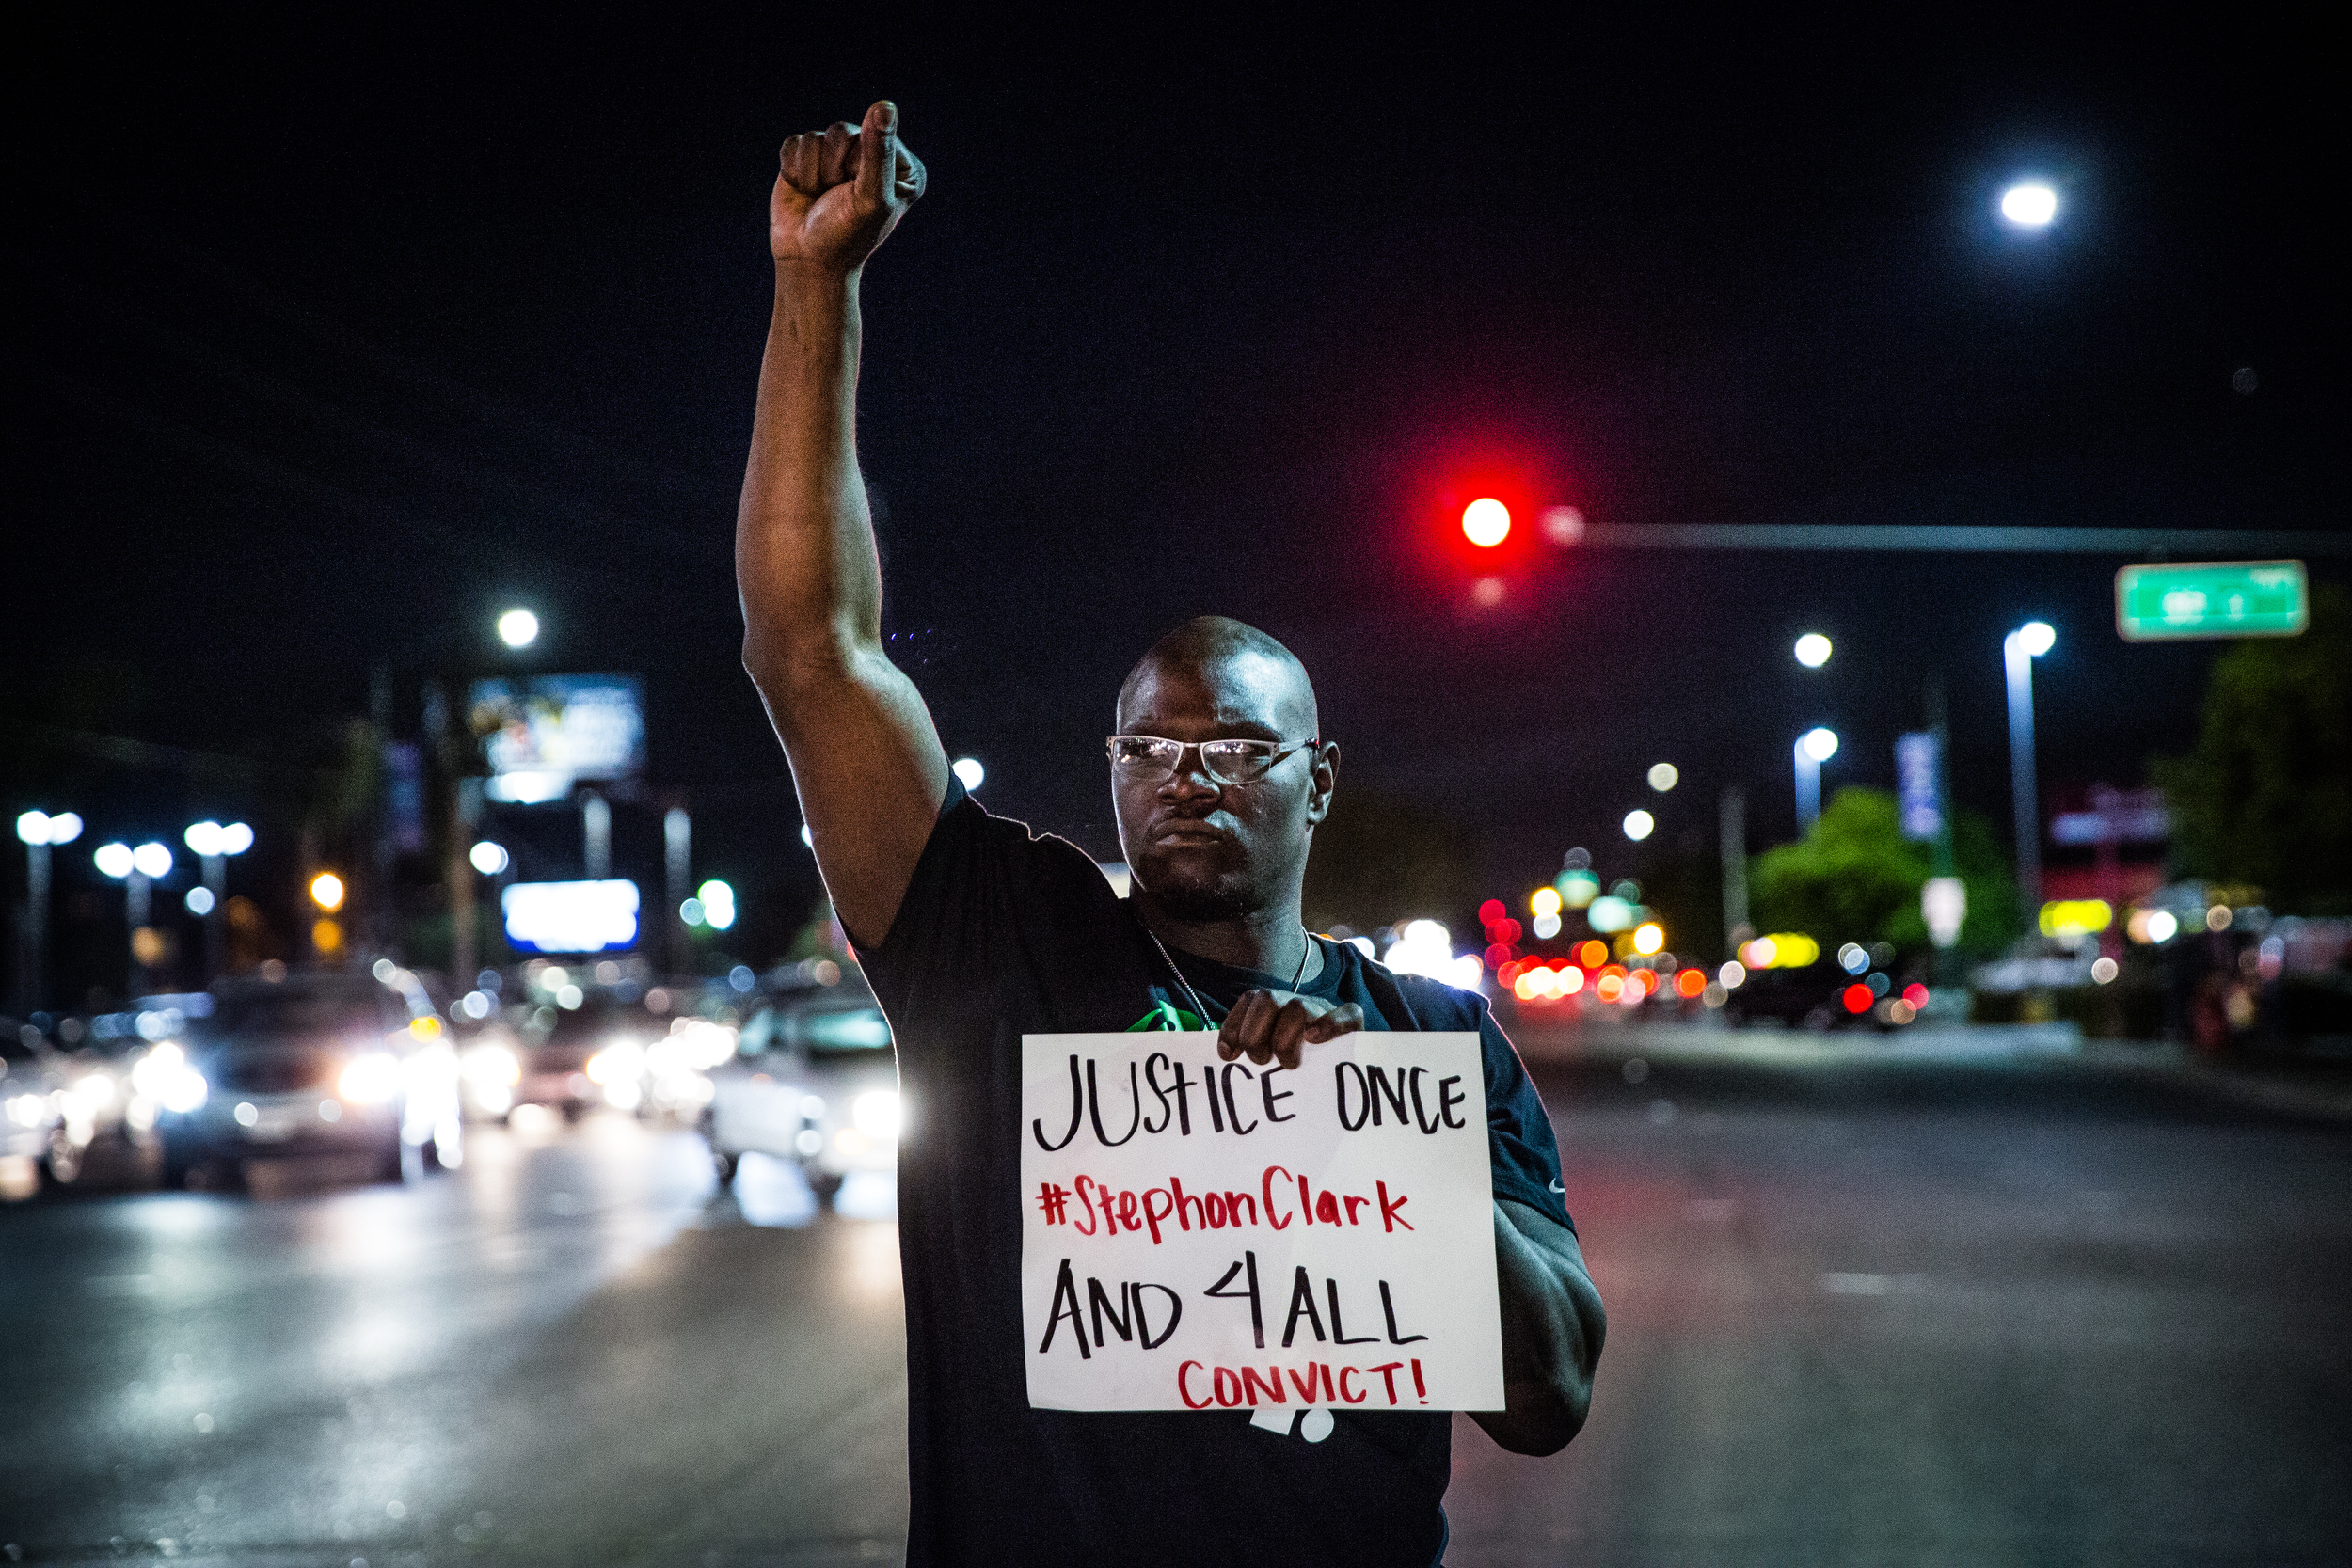  Tyvonne Joseph protests in the street during a candlelight vigil for Stephon Clark in South Sacramento on March 31, 2018. 